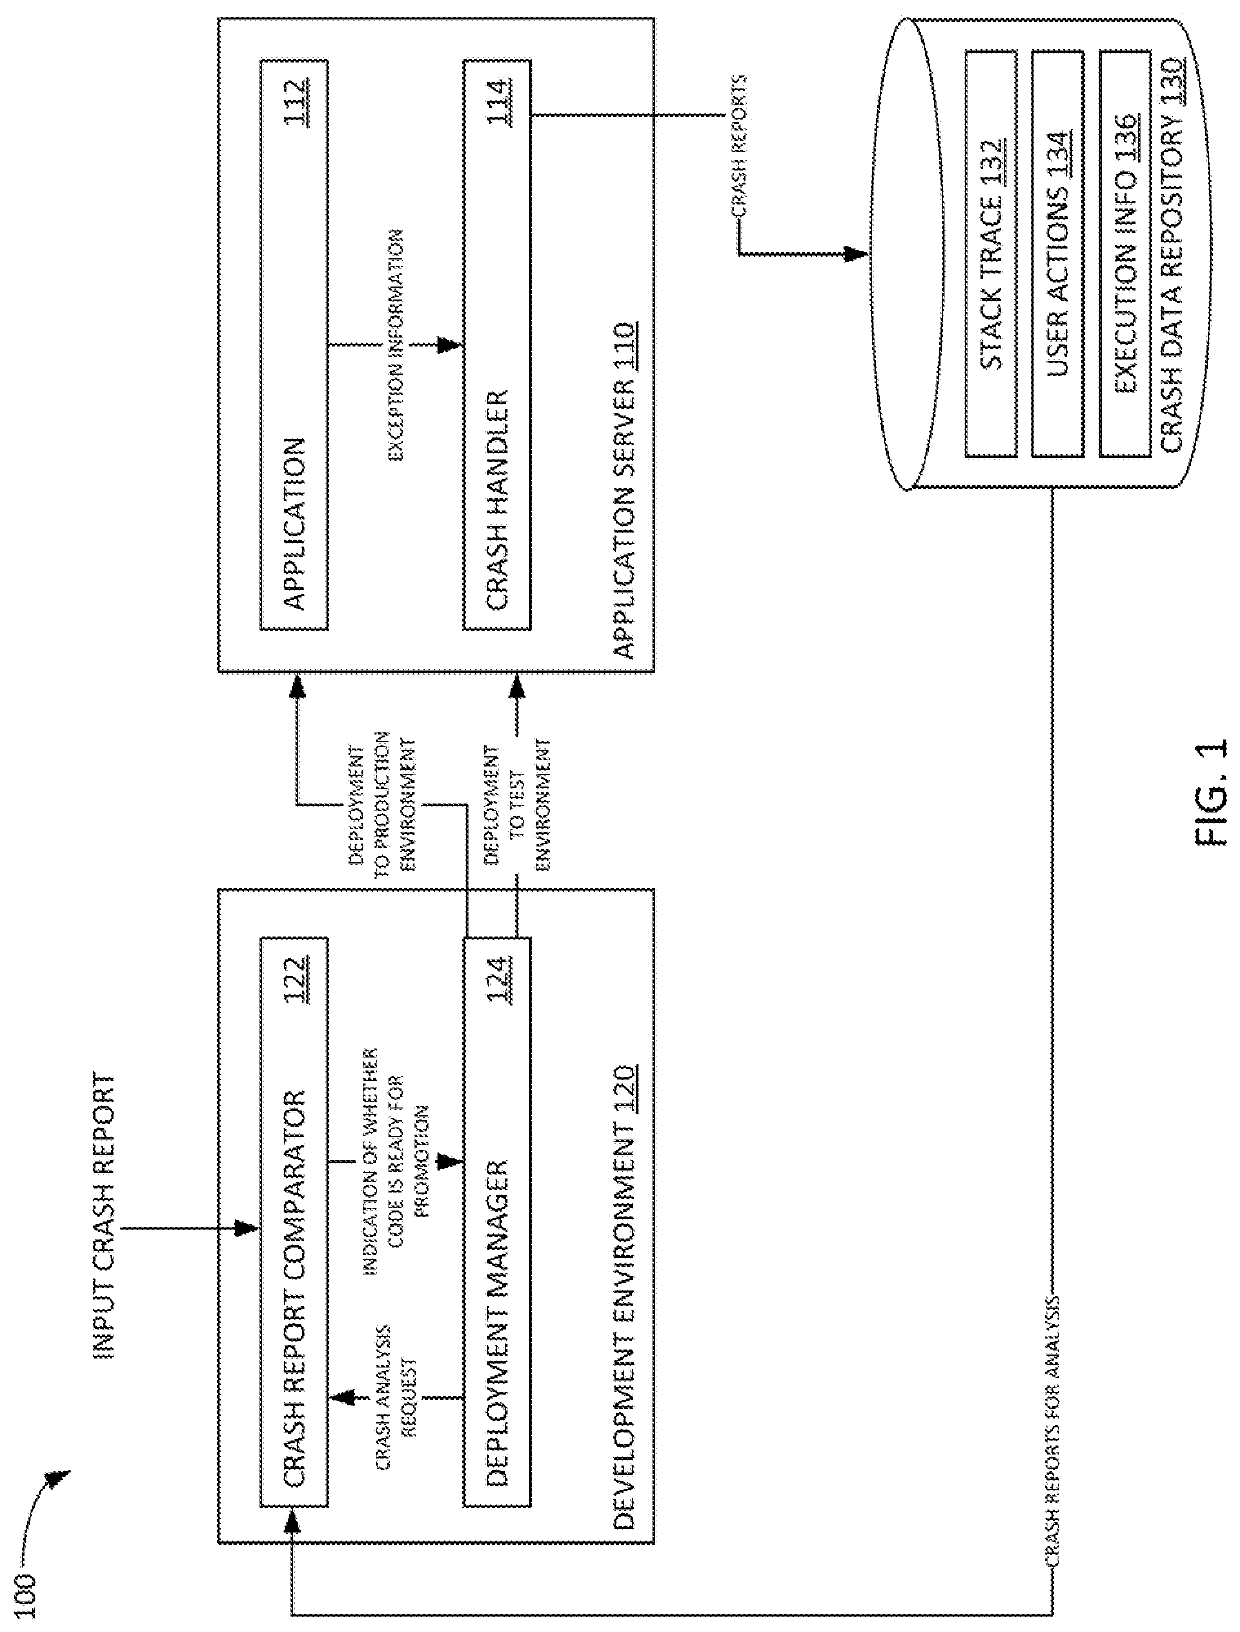 Methods and systems for determining crash similarity based on stack traces and user action sequence information